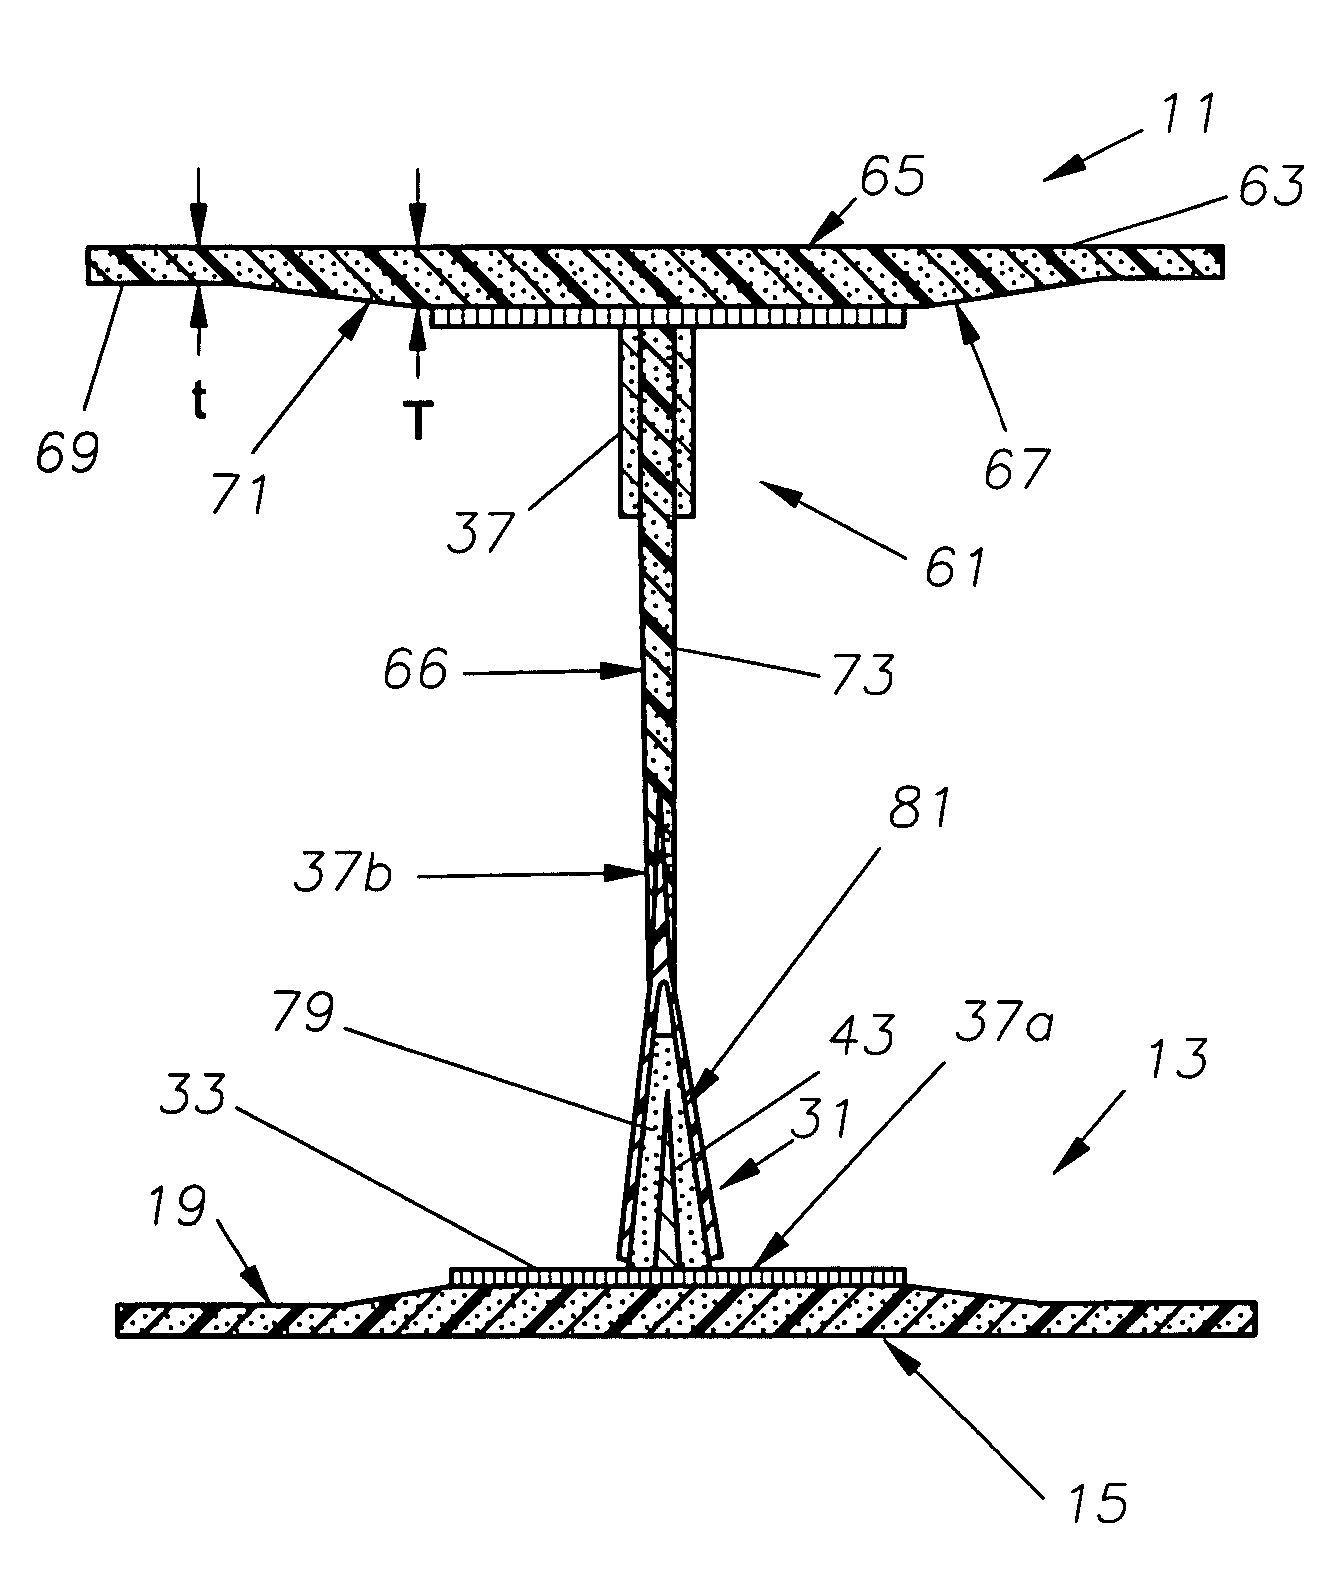 Apparatus, system, and method of joining structural components with a tapered tension bond joint